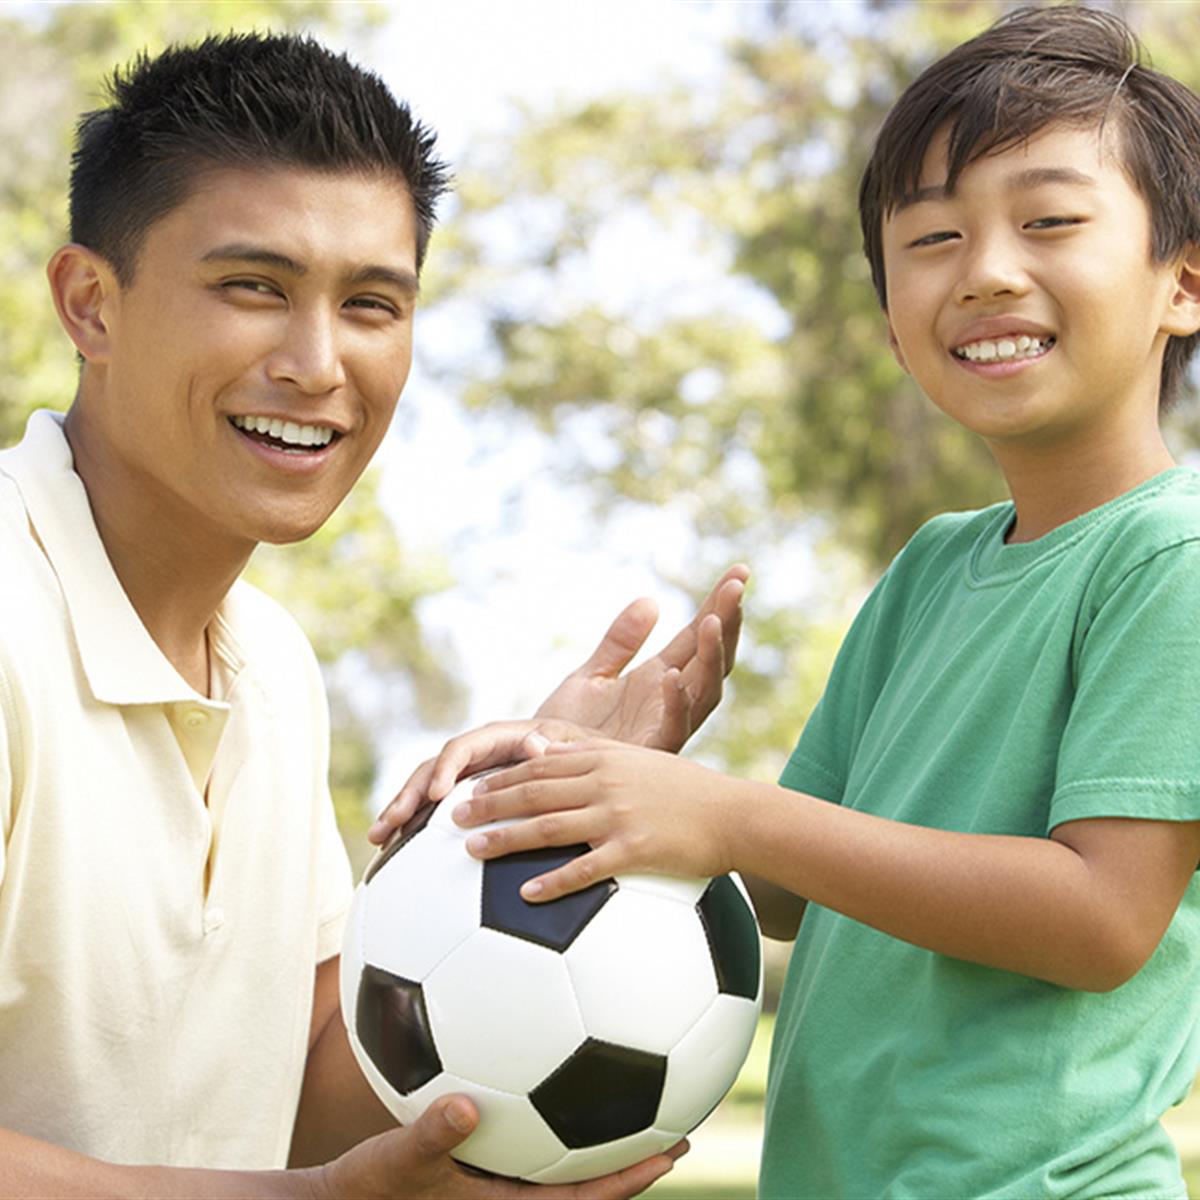 Sports and play are even more essential for mental health after